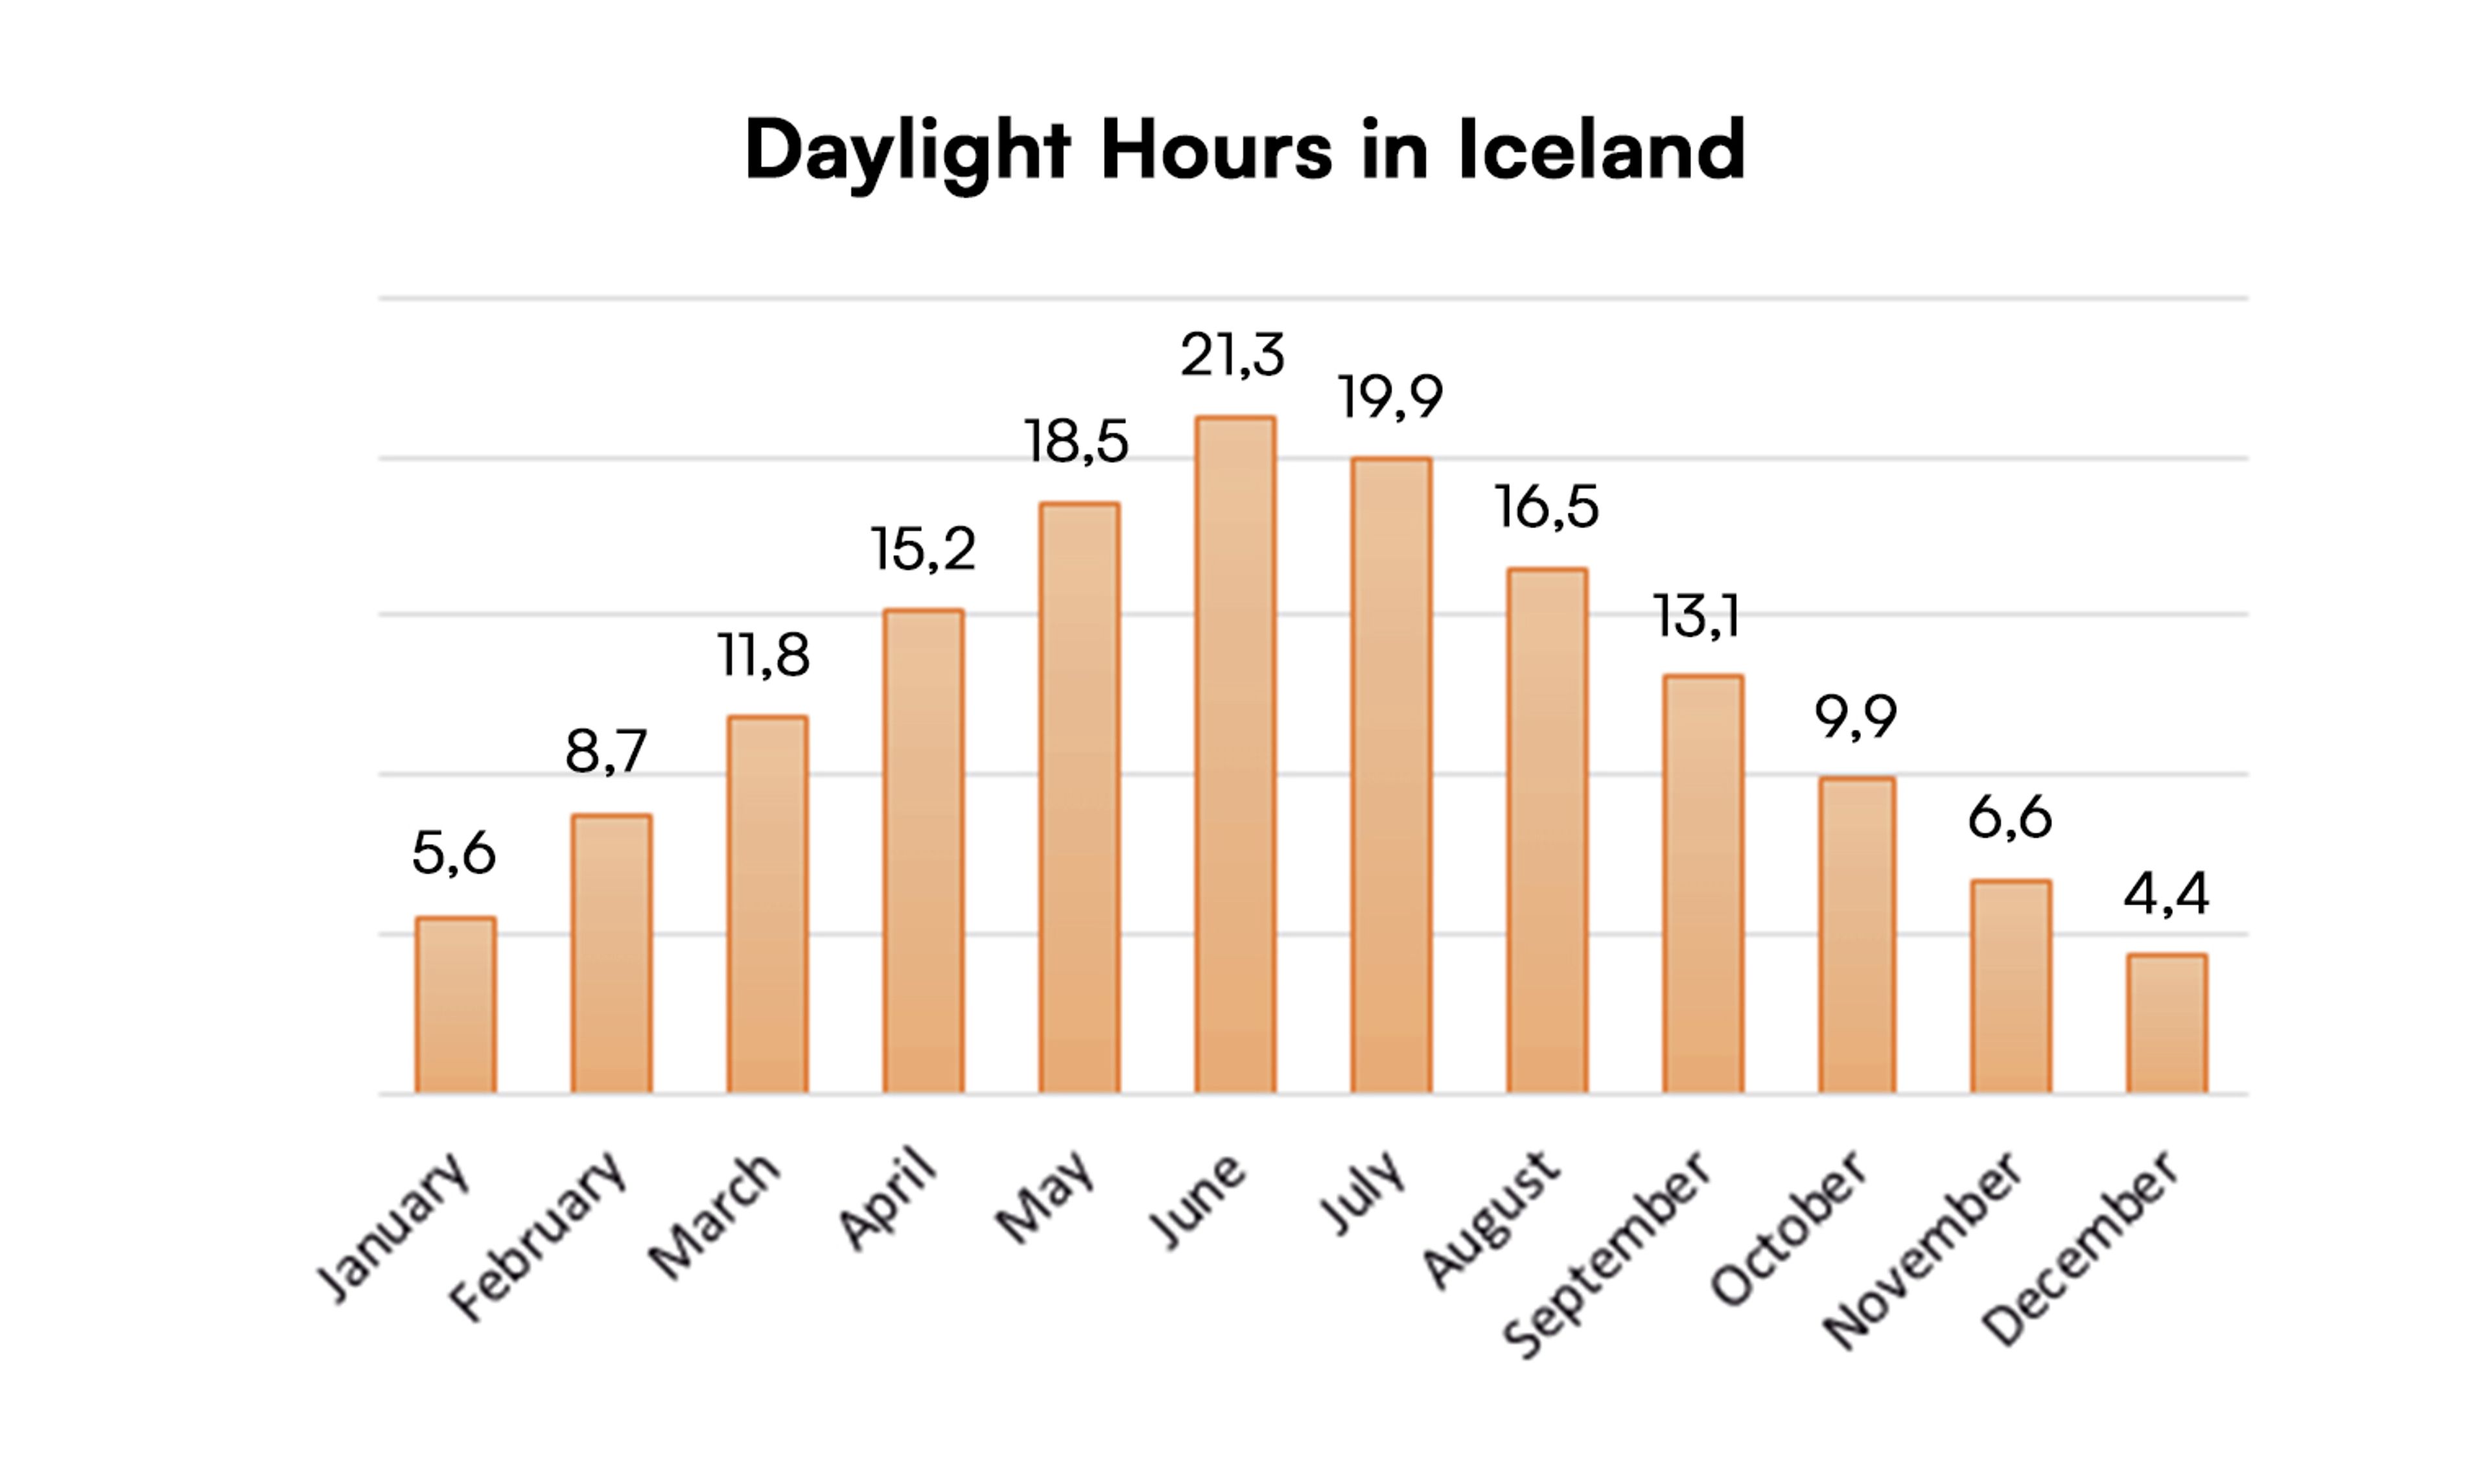 Daylight hours in January in Iceland